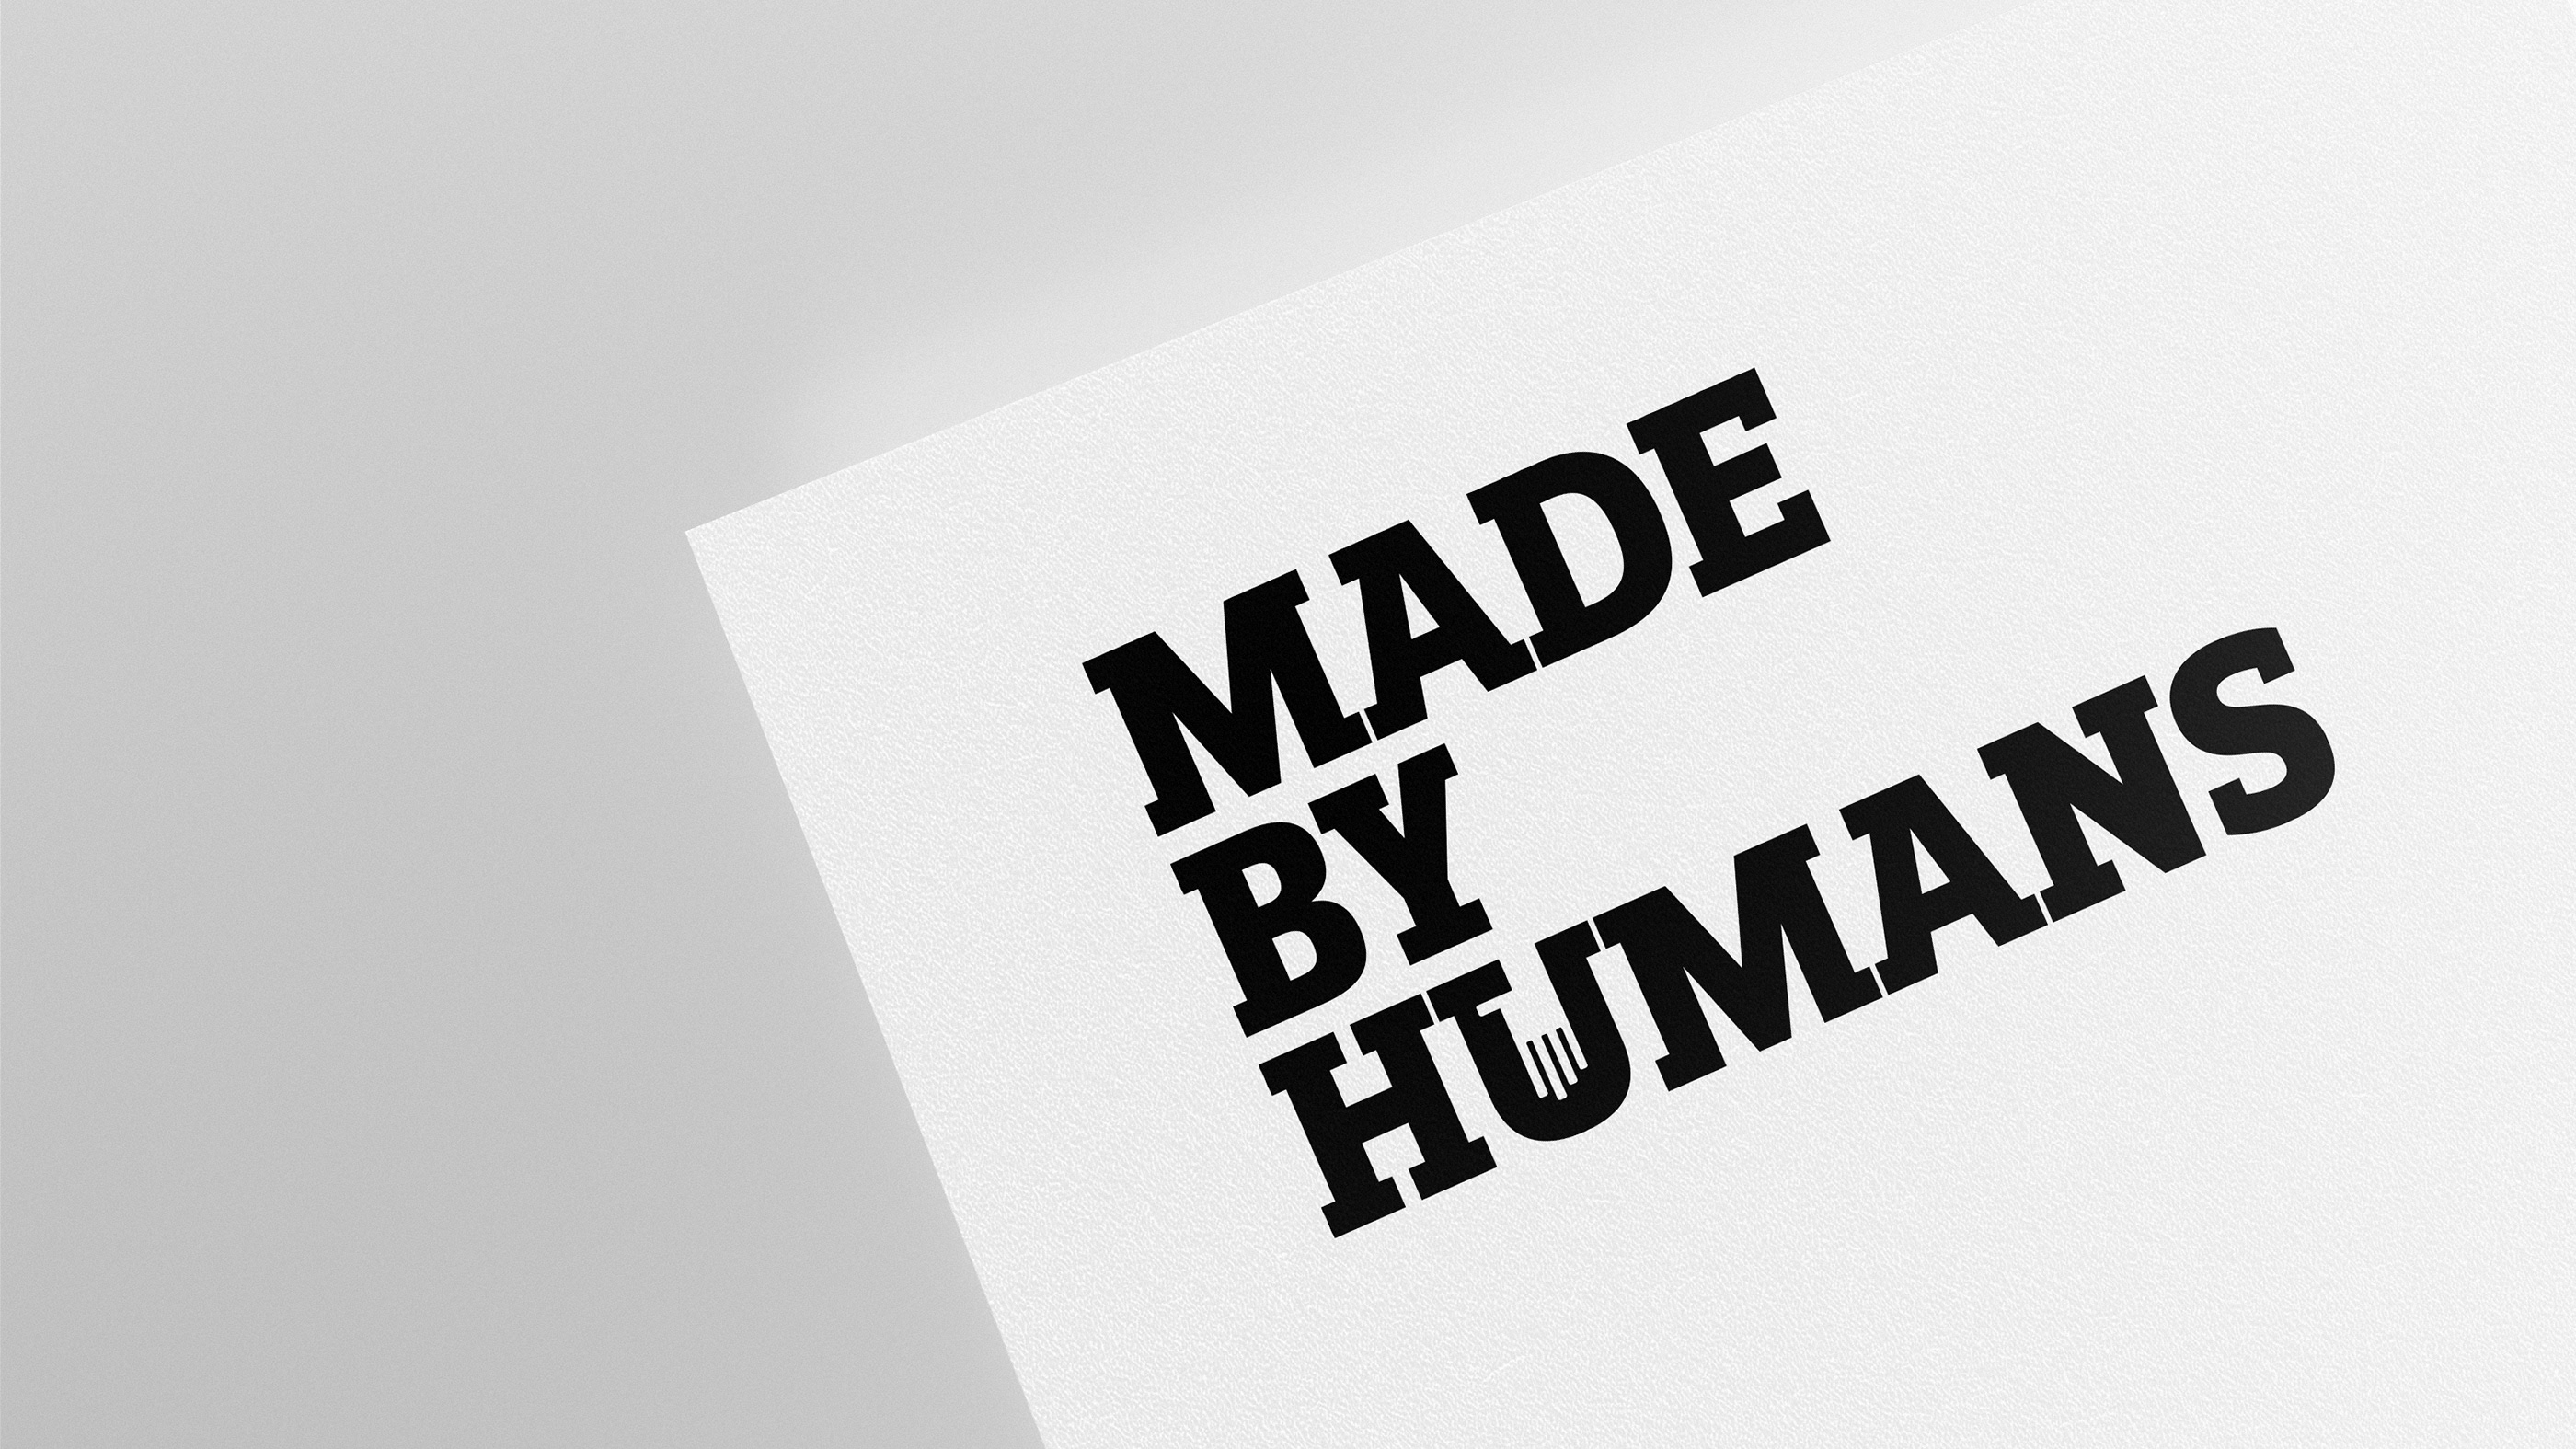 Made by humans.